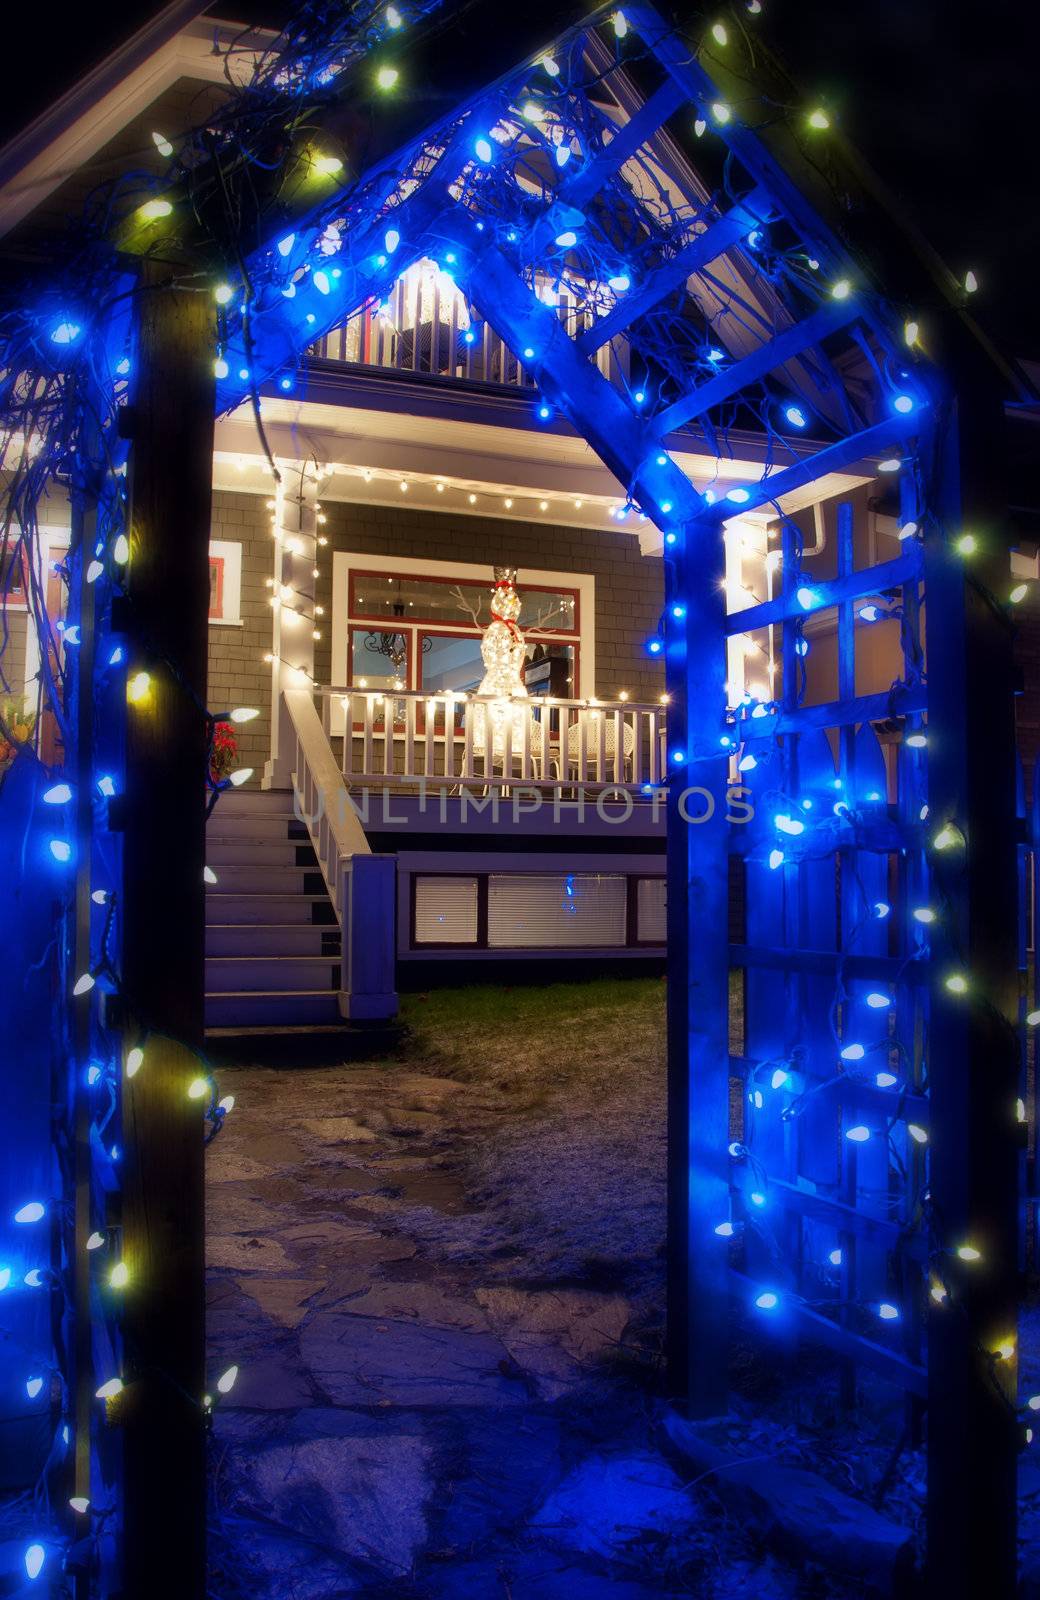 Blue Christmas Light Archway With Snowman by JamesWheeler